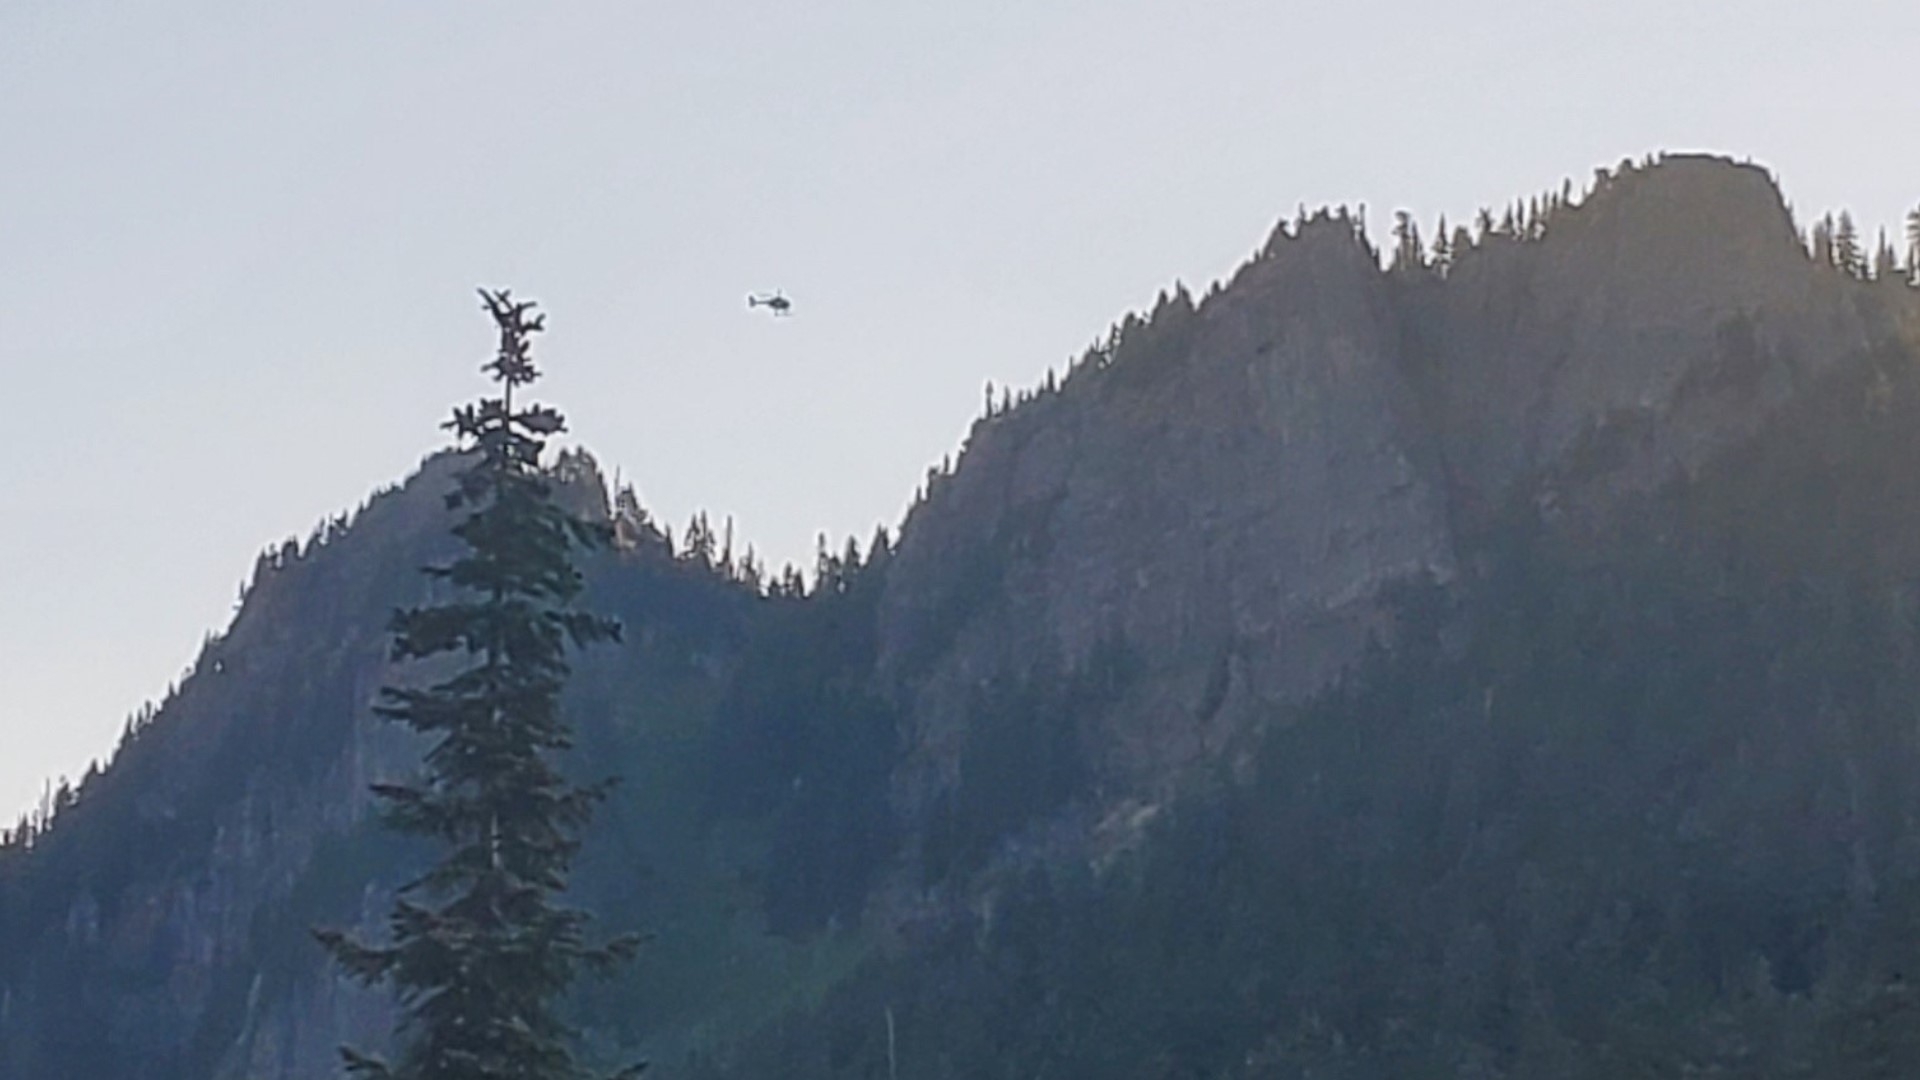 A missing hiker was found dead near Lake Lillian by search and rescue crews Wednesday morning after he was reported missing by friends and family on Monday.